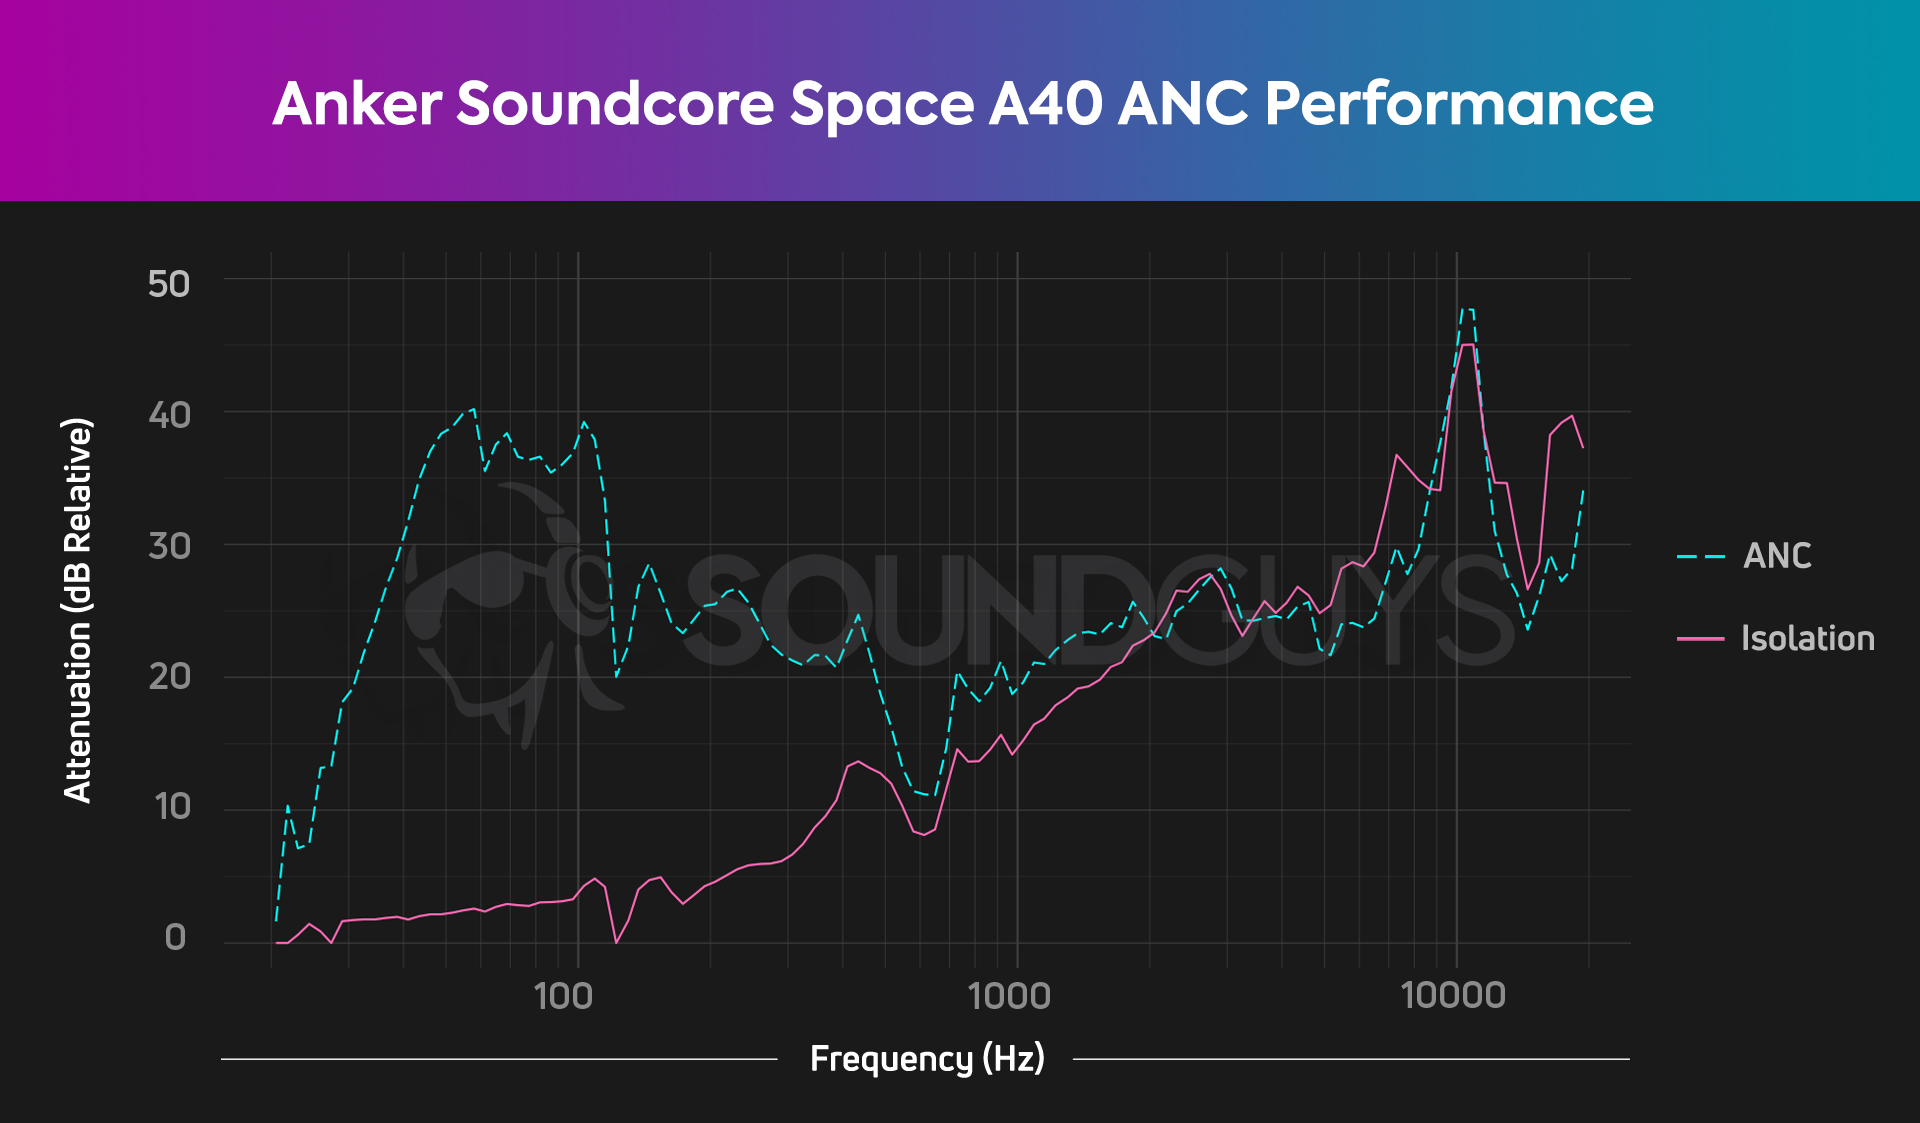 The noise canceling and isolation chart for the Anker Soundcore Space A40, showing great noise canceling in the low end.